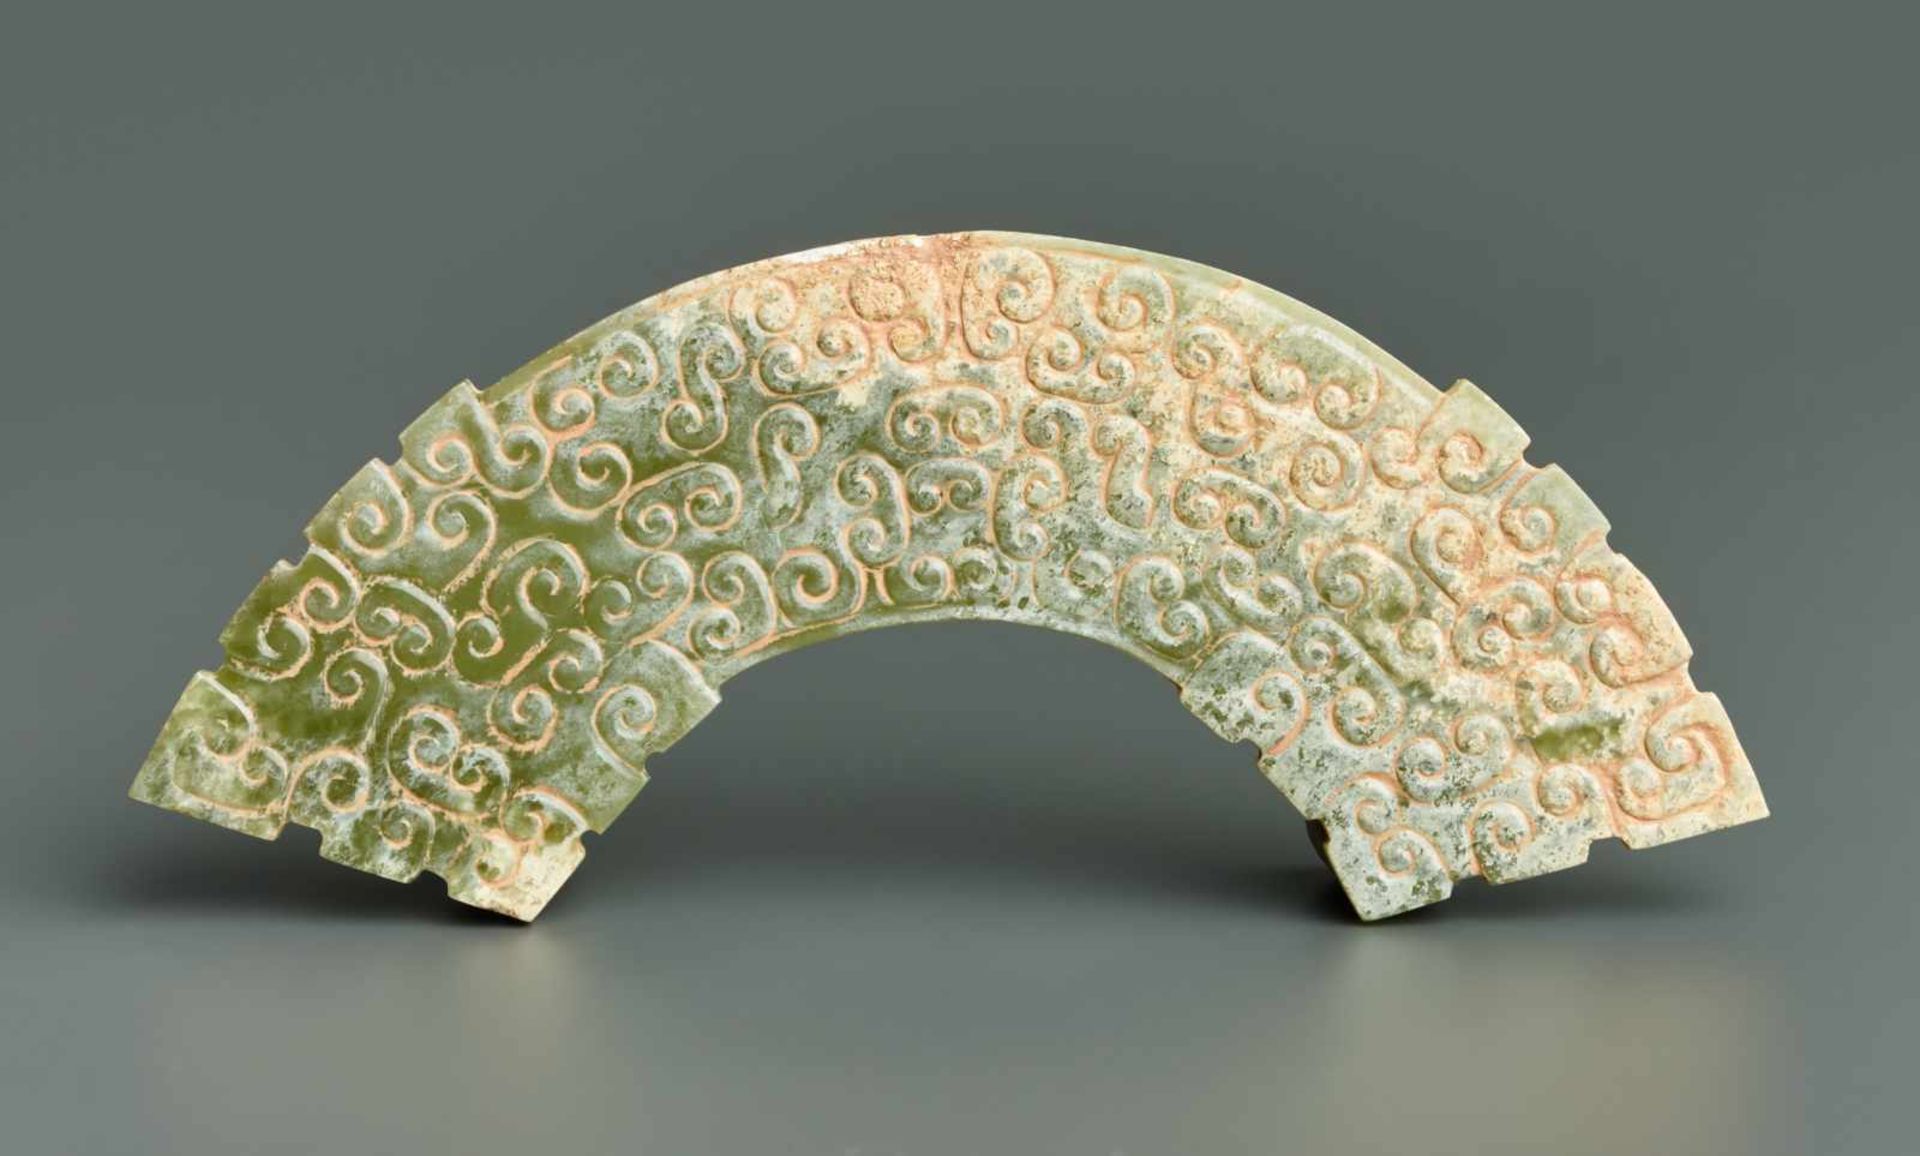 HUANG WITH PATTERNS OF CLOUD-SHAPED CURLS This jade is published in Filippo Salviati 4000 YEARS OF